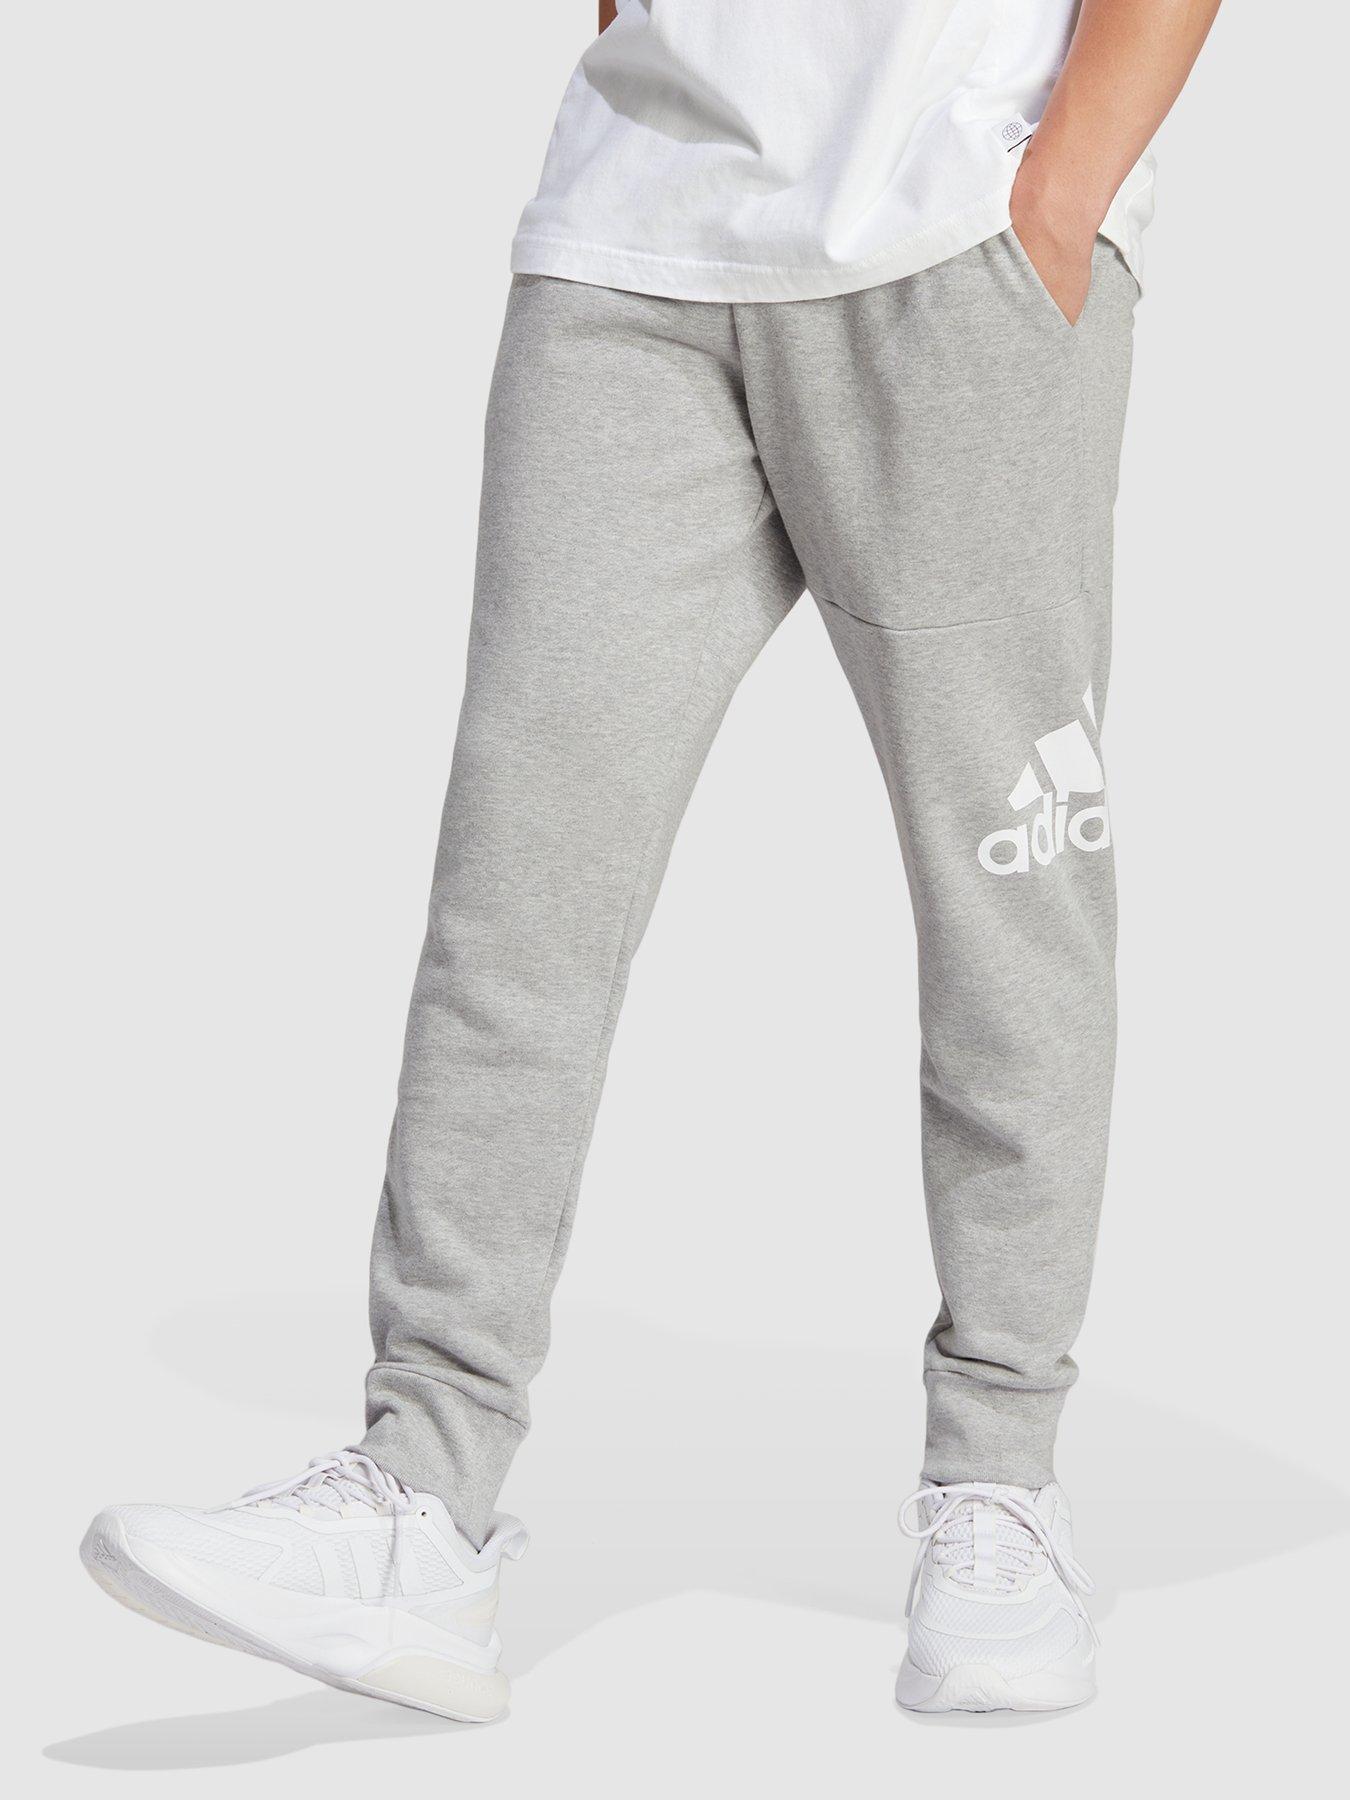  bebe Women's Sport Logo Basic French Terry Jogger, Heather  Grey, S : Clothing, Shoes & Jewelry